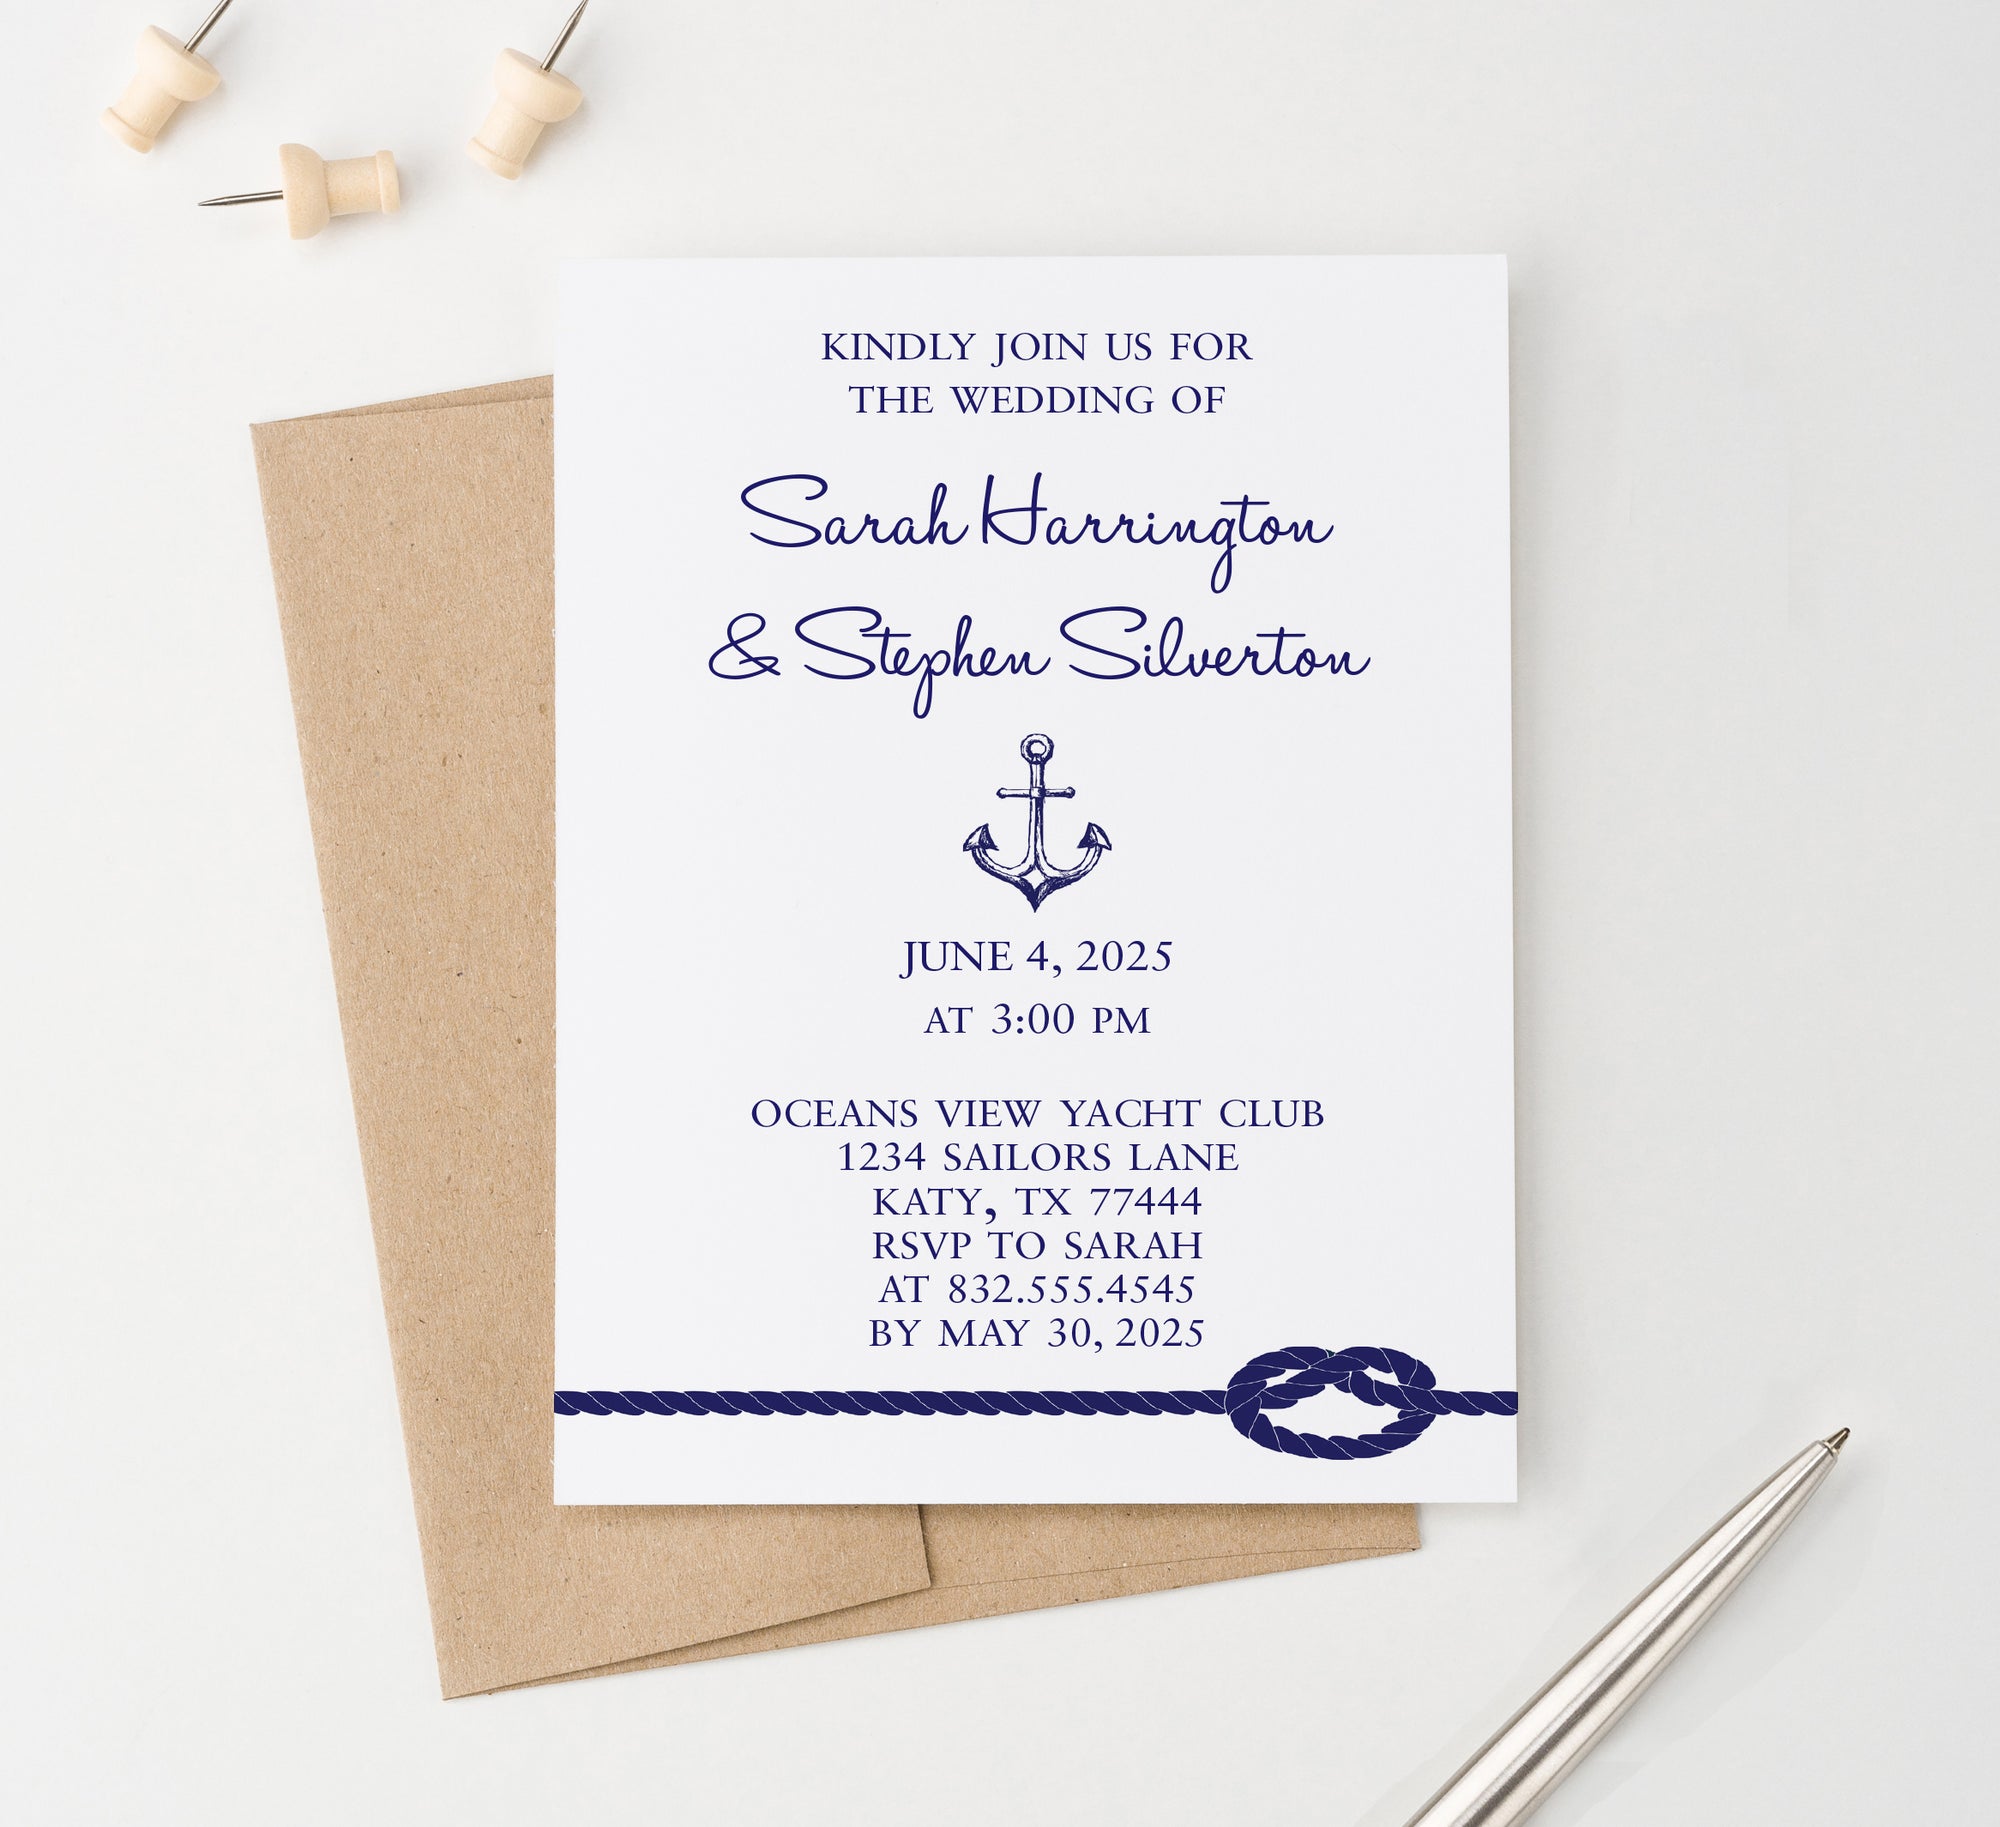 WI011 Nautical Wedding Invites Personalized modern classic beach tropical boat yacht invitations marriage